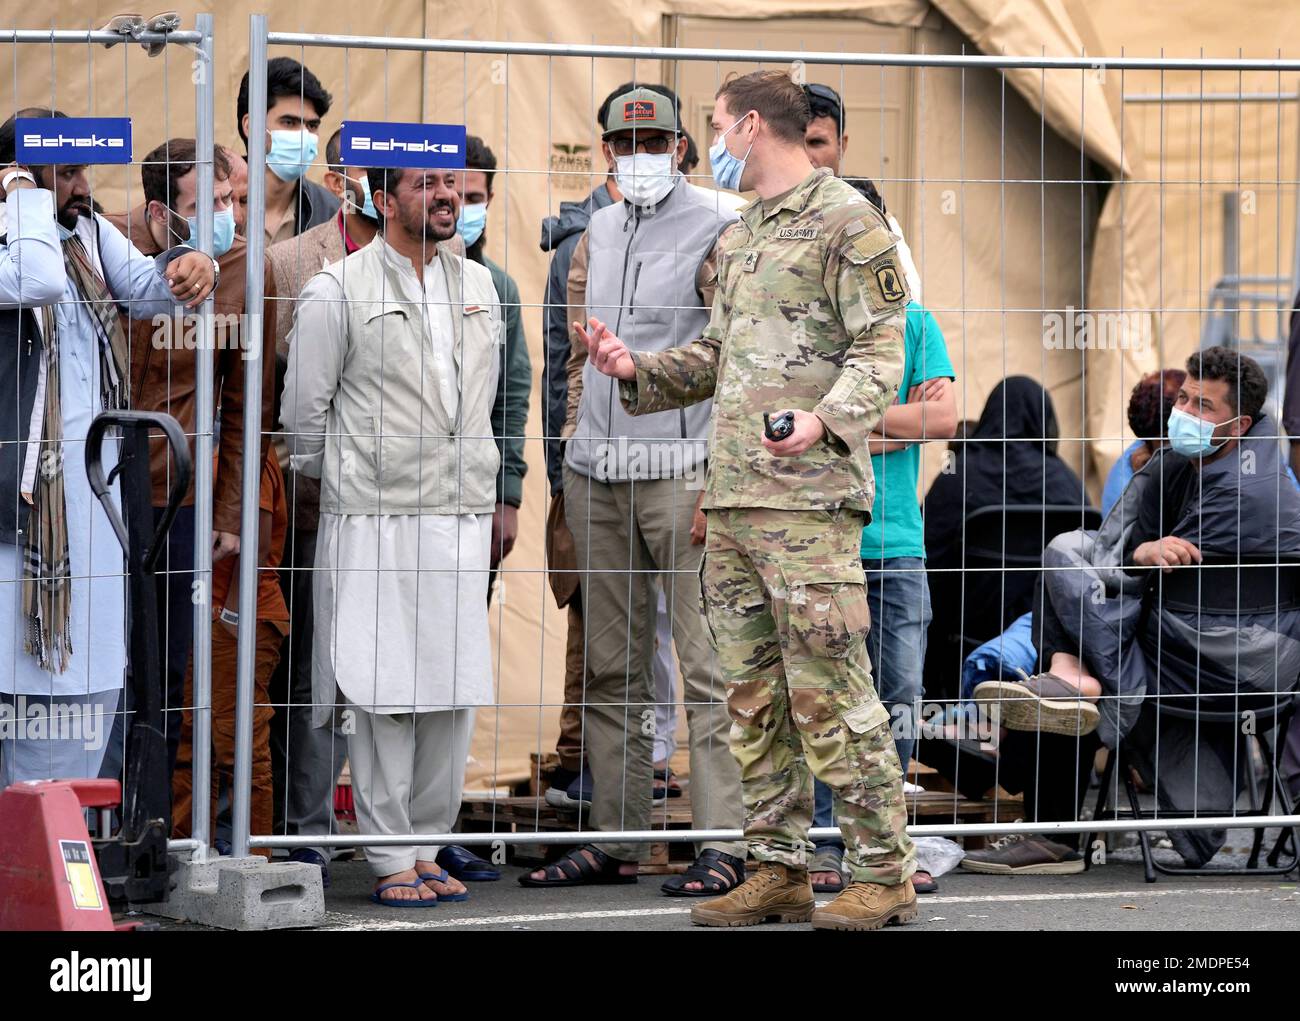 A soldier talks to people at the Ramstein U.S. Air Base in Ramstein, Germany,  Monday, Aug. 30, 2021. The largest American military community overseas houses  thousands Afghan evacuees in a tent city